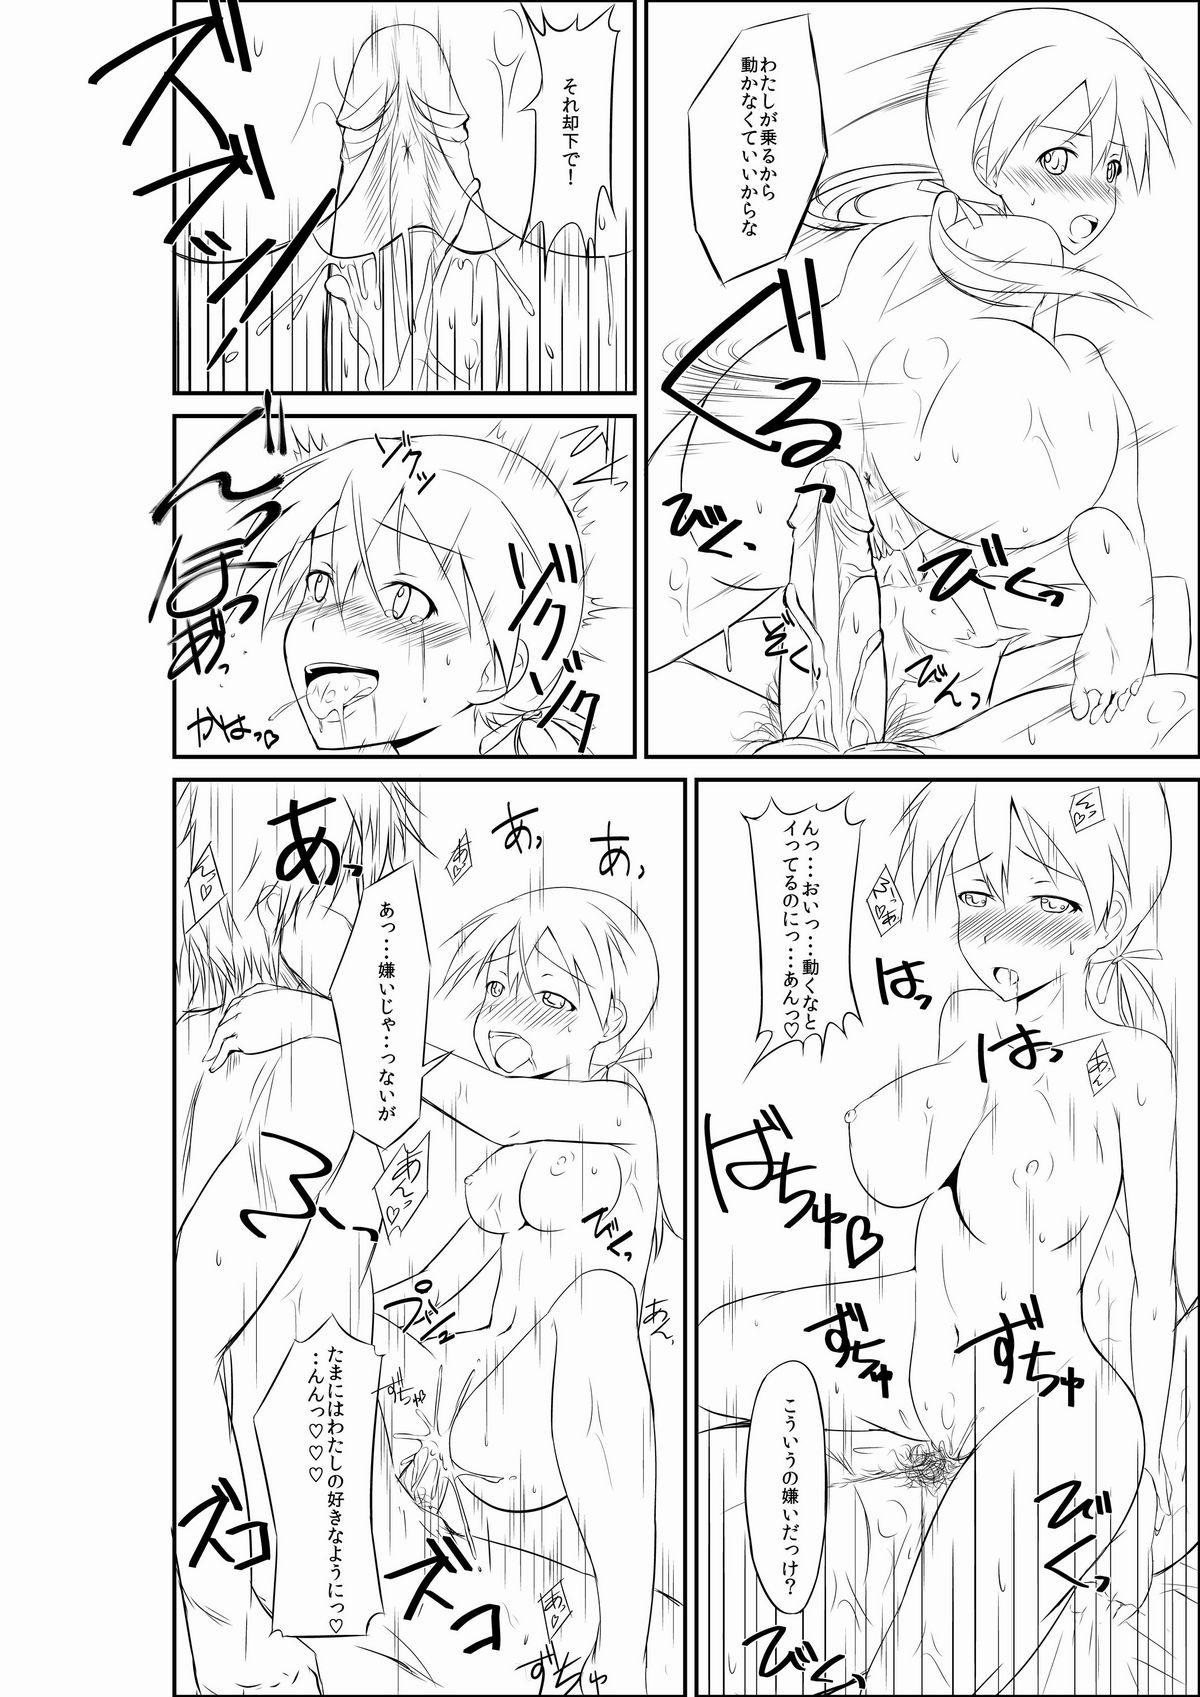 Orgasmo 練習 お姉ちゃんとヘルマちゃん - Strike witches Pounding - Page 6